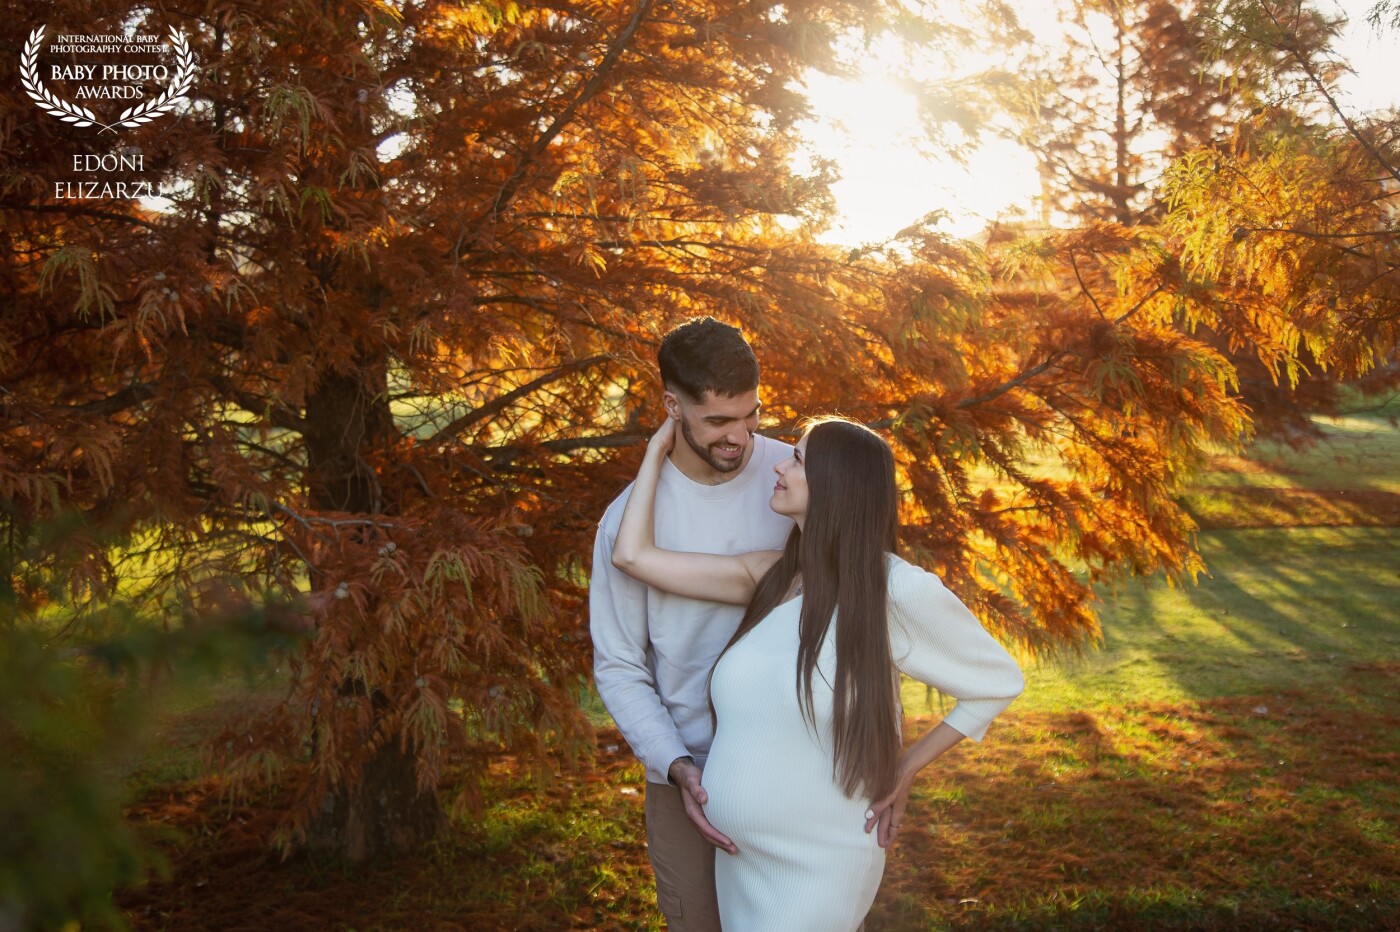 This beautiful couple came to record the sweet expectation of their baby girl. Love this photo with these autumn colors and their exchange of glances!